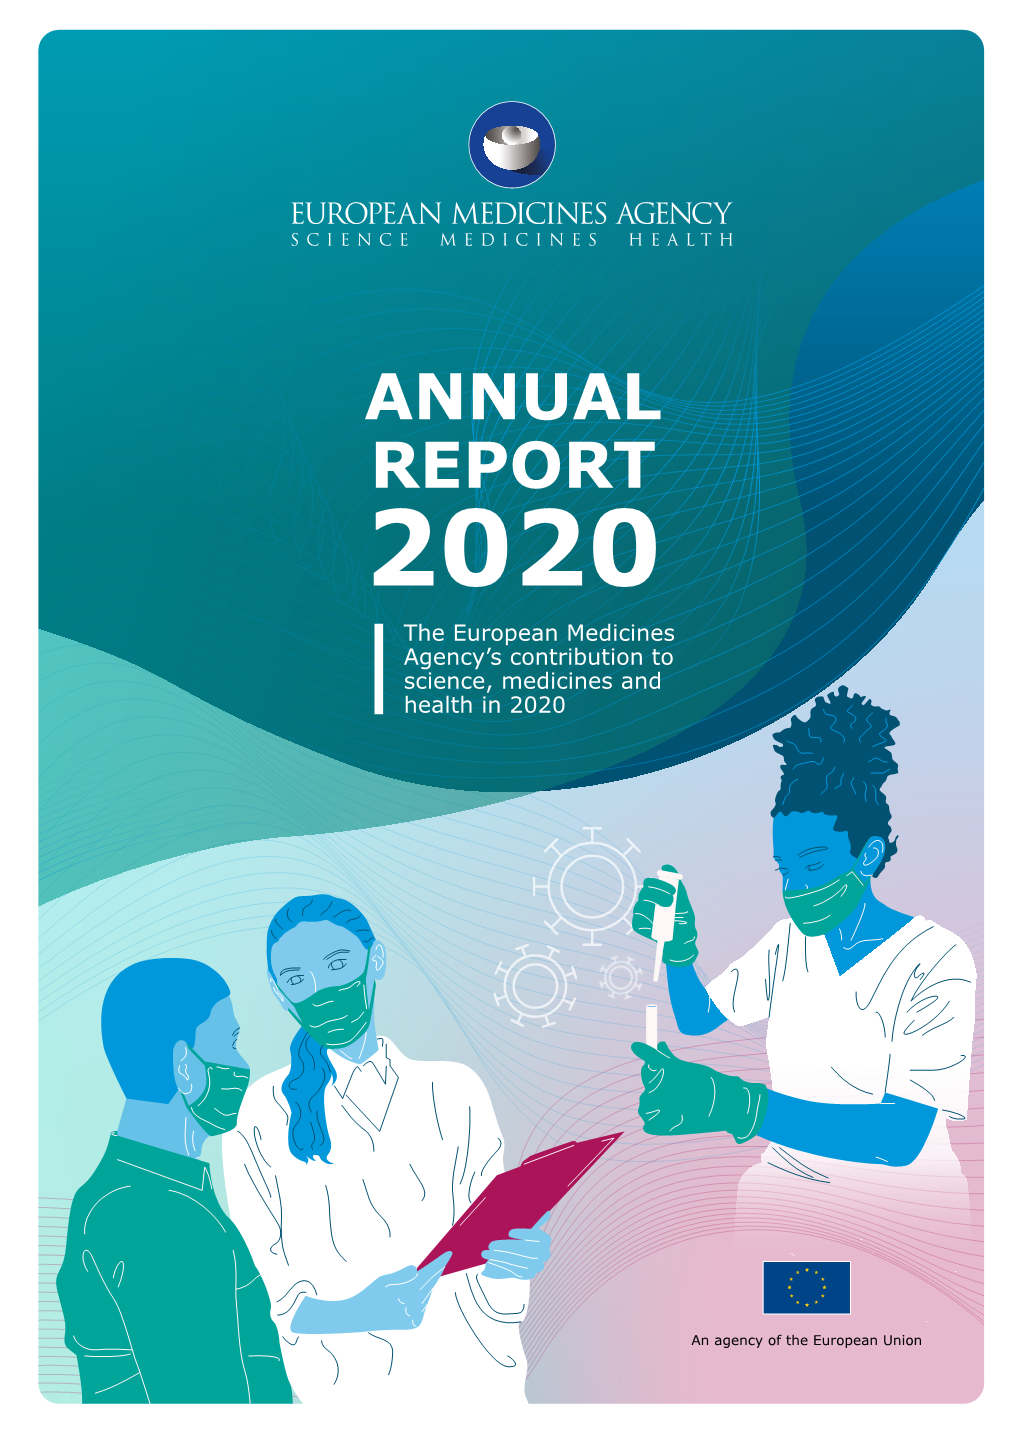 ANNUAL REPORT 2020 the European Medicines Agency’S Contribution to Science, Medicines and Health in 2020